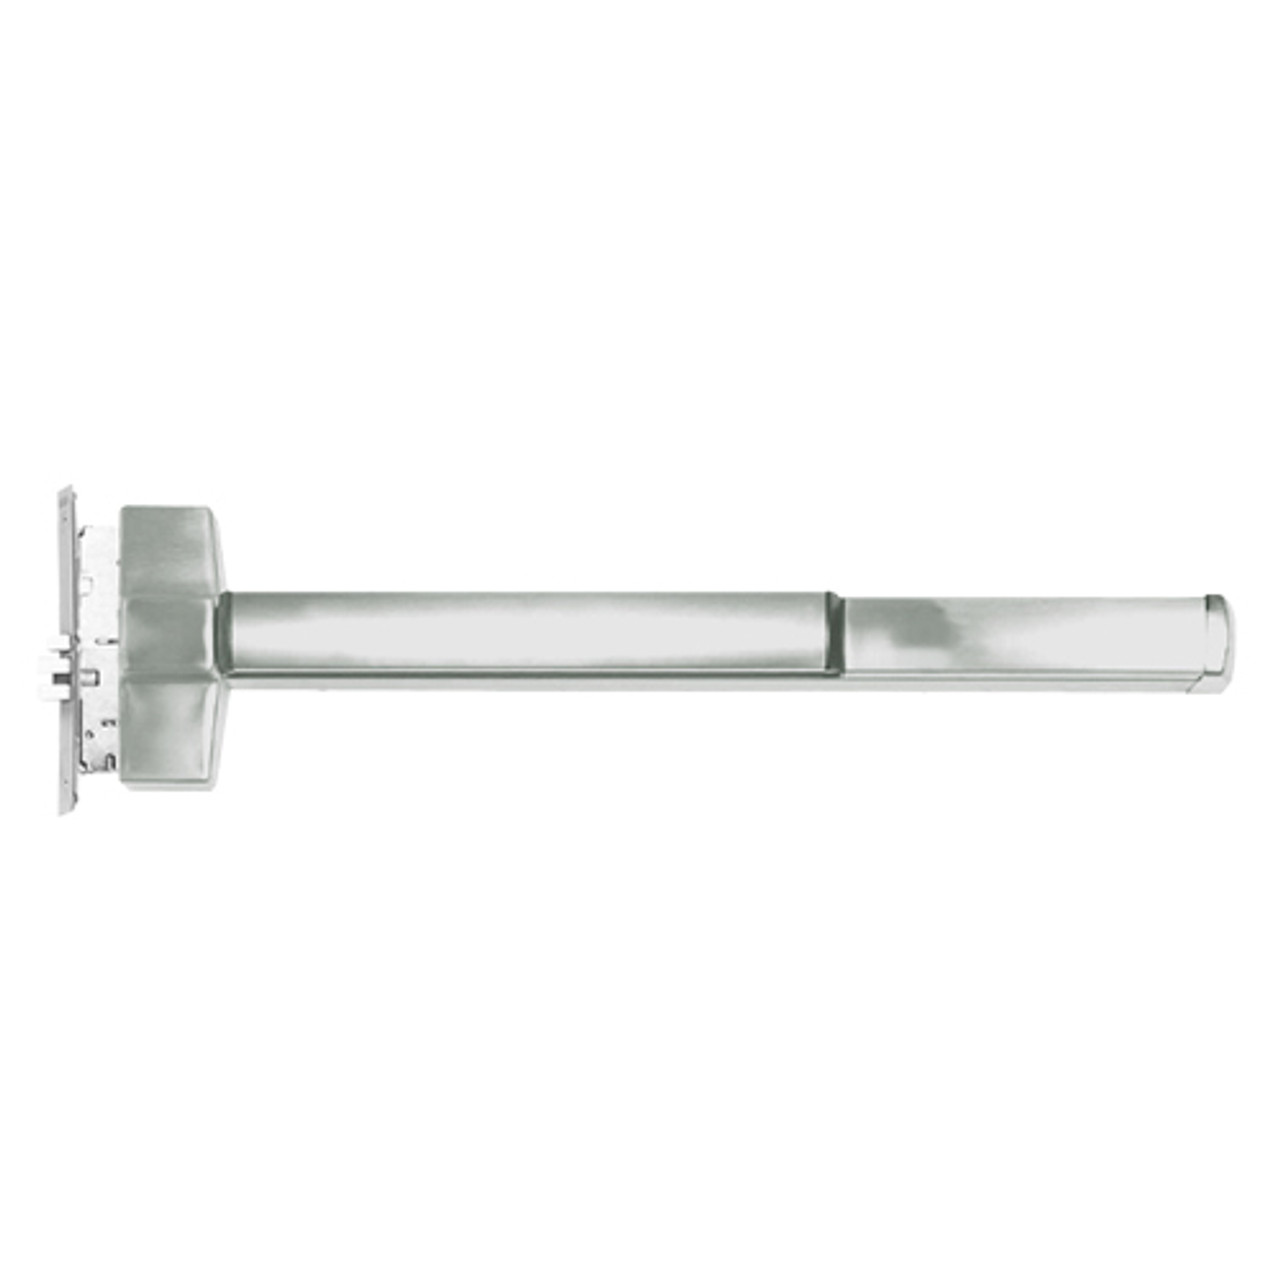 ED5600ALD-619-LHR Corbin ED5600 Series Fire Rated Mortise Exit Device with Delayed Egress in Satin Nickel Finish